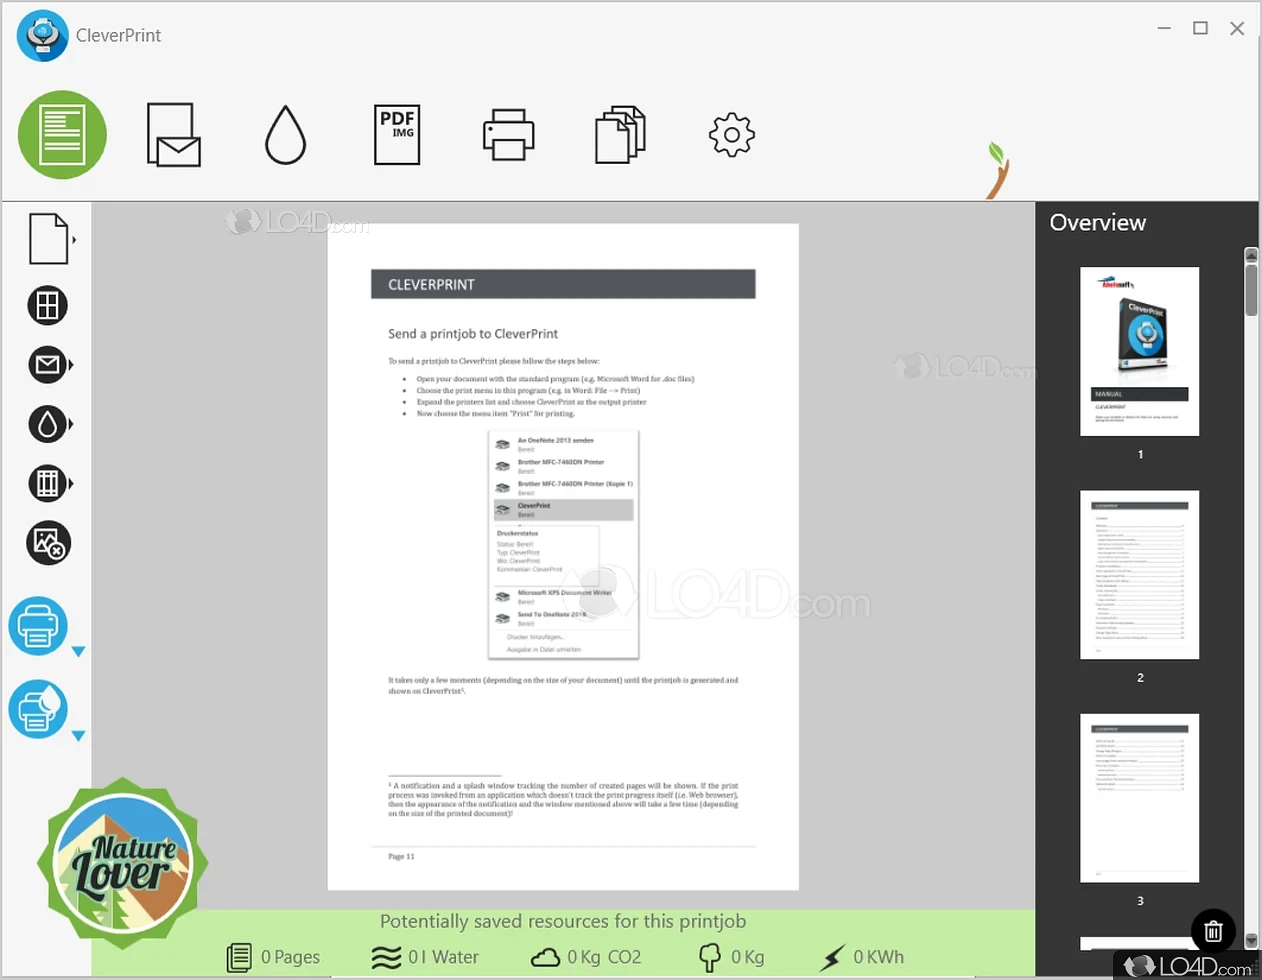 Sleek interface and smooth functionality - Screenshot of CleverPrint